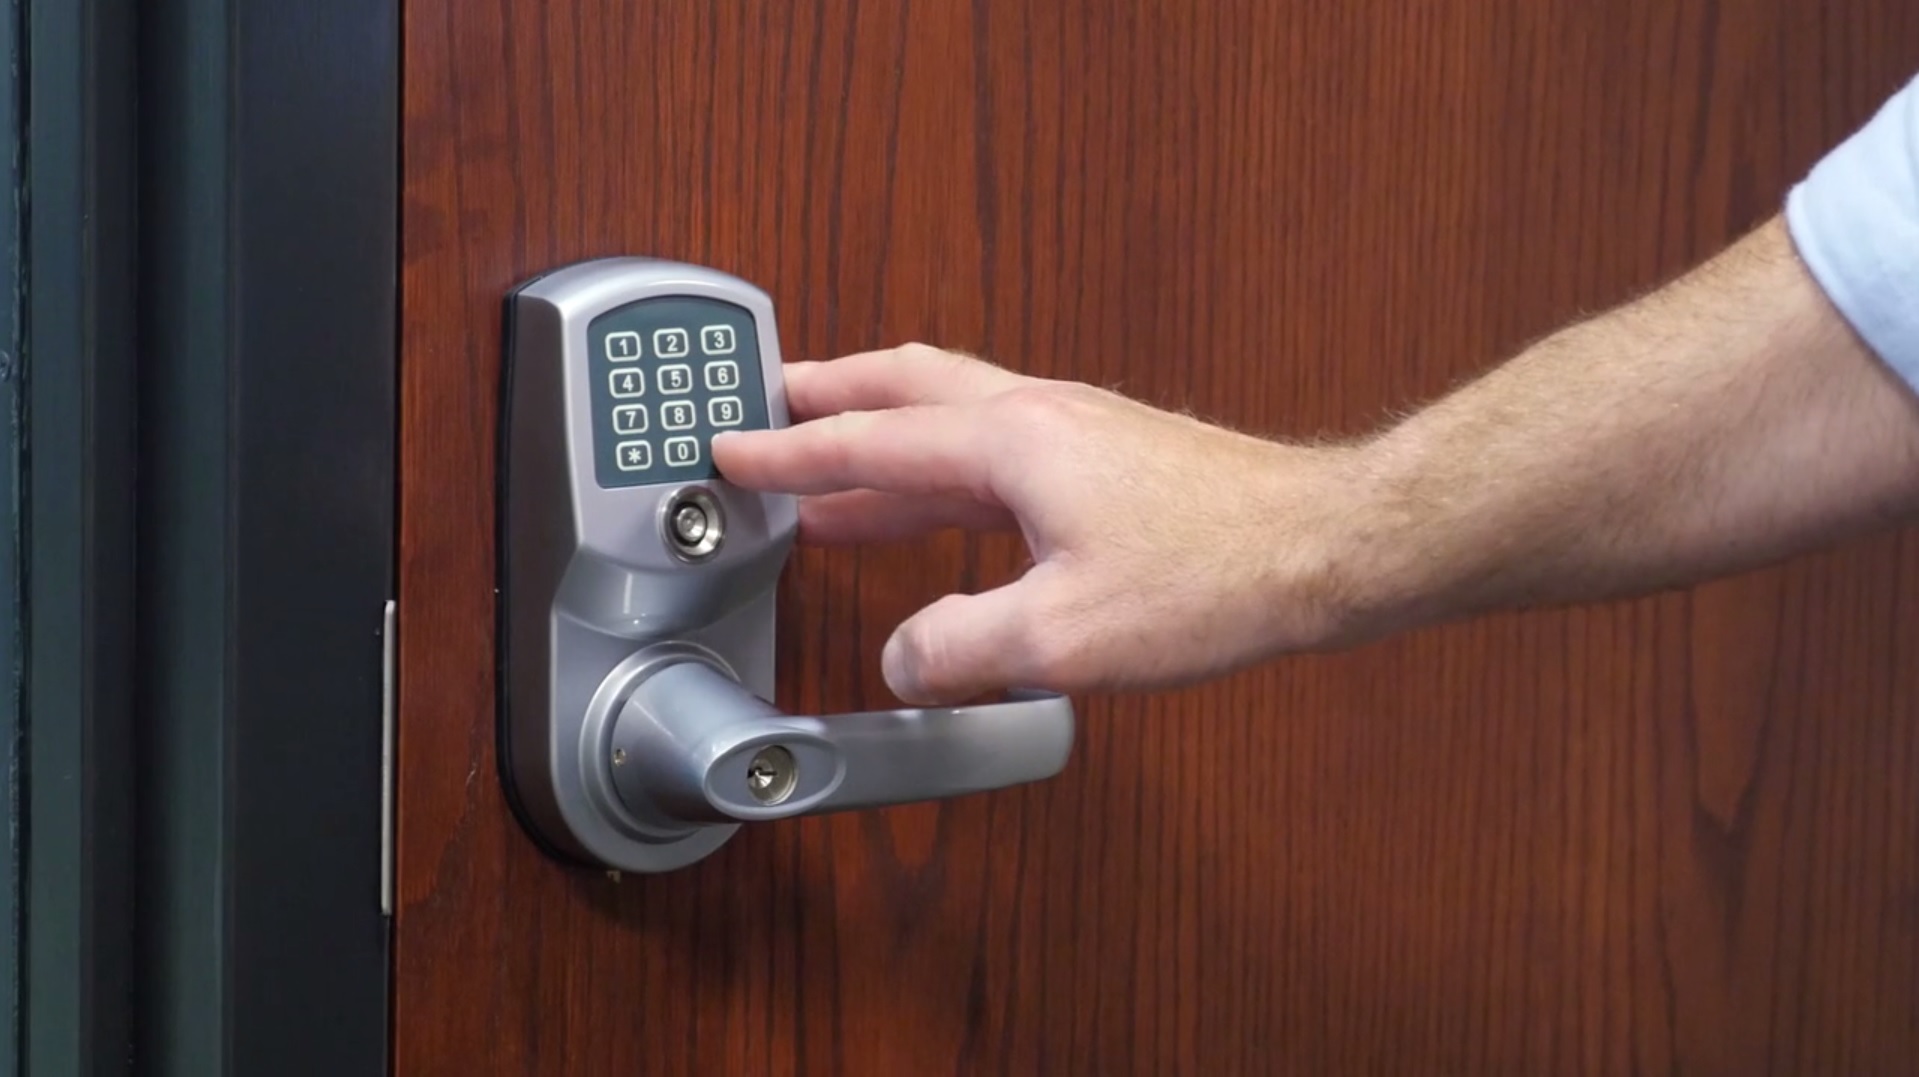 RemoteLock 6i is the new commercial WiFi keypad smart lock developed for property managers to monitor and manage security.